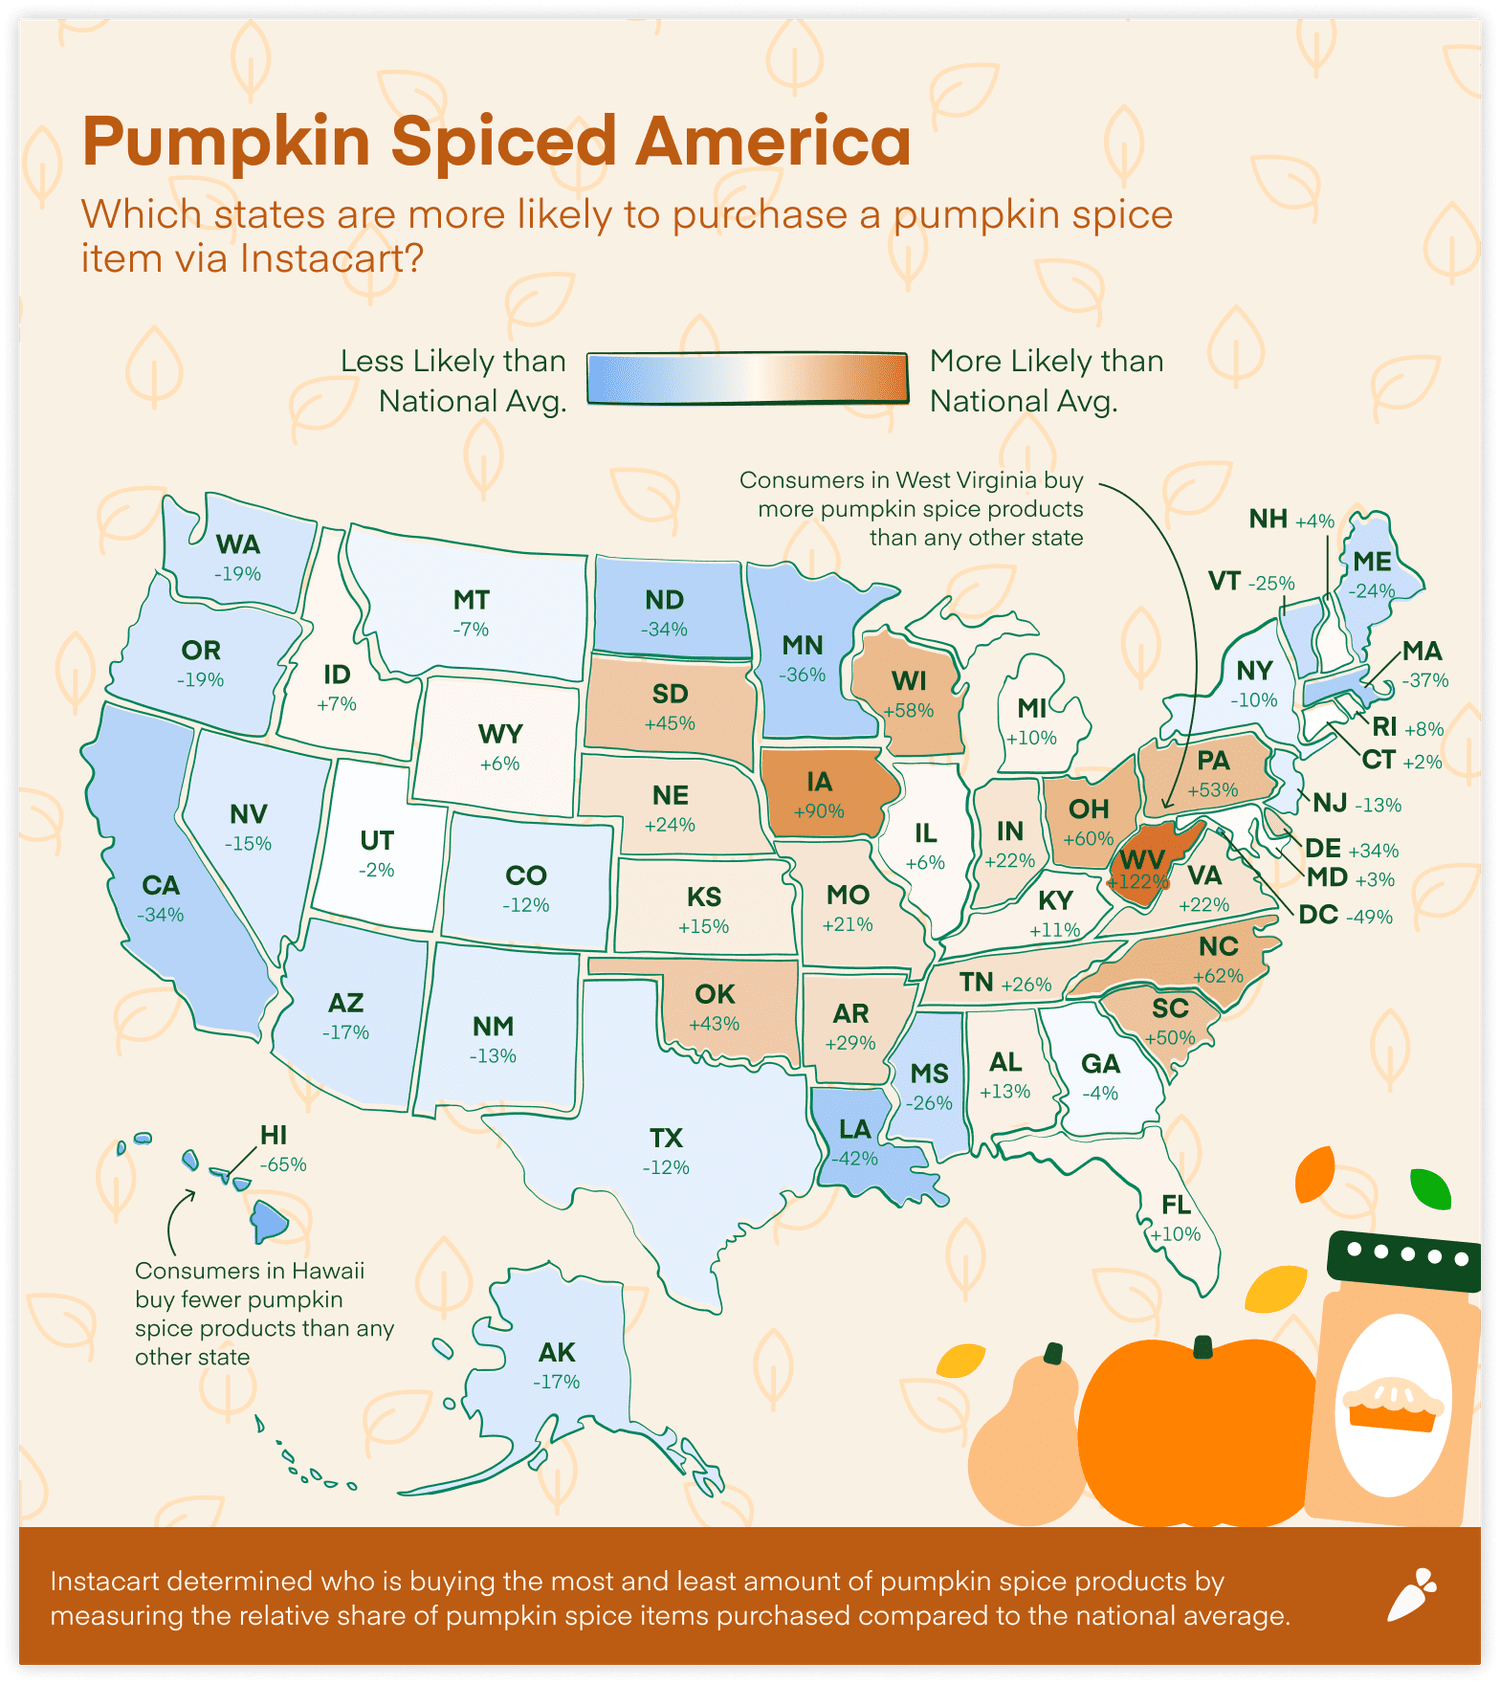 map of the U.S. showing which states purchase the most pumpkin spice products